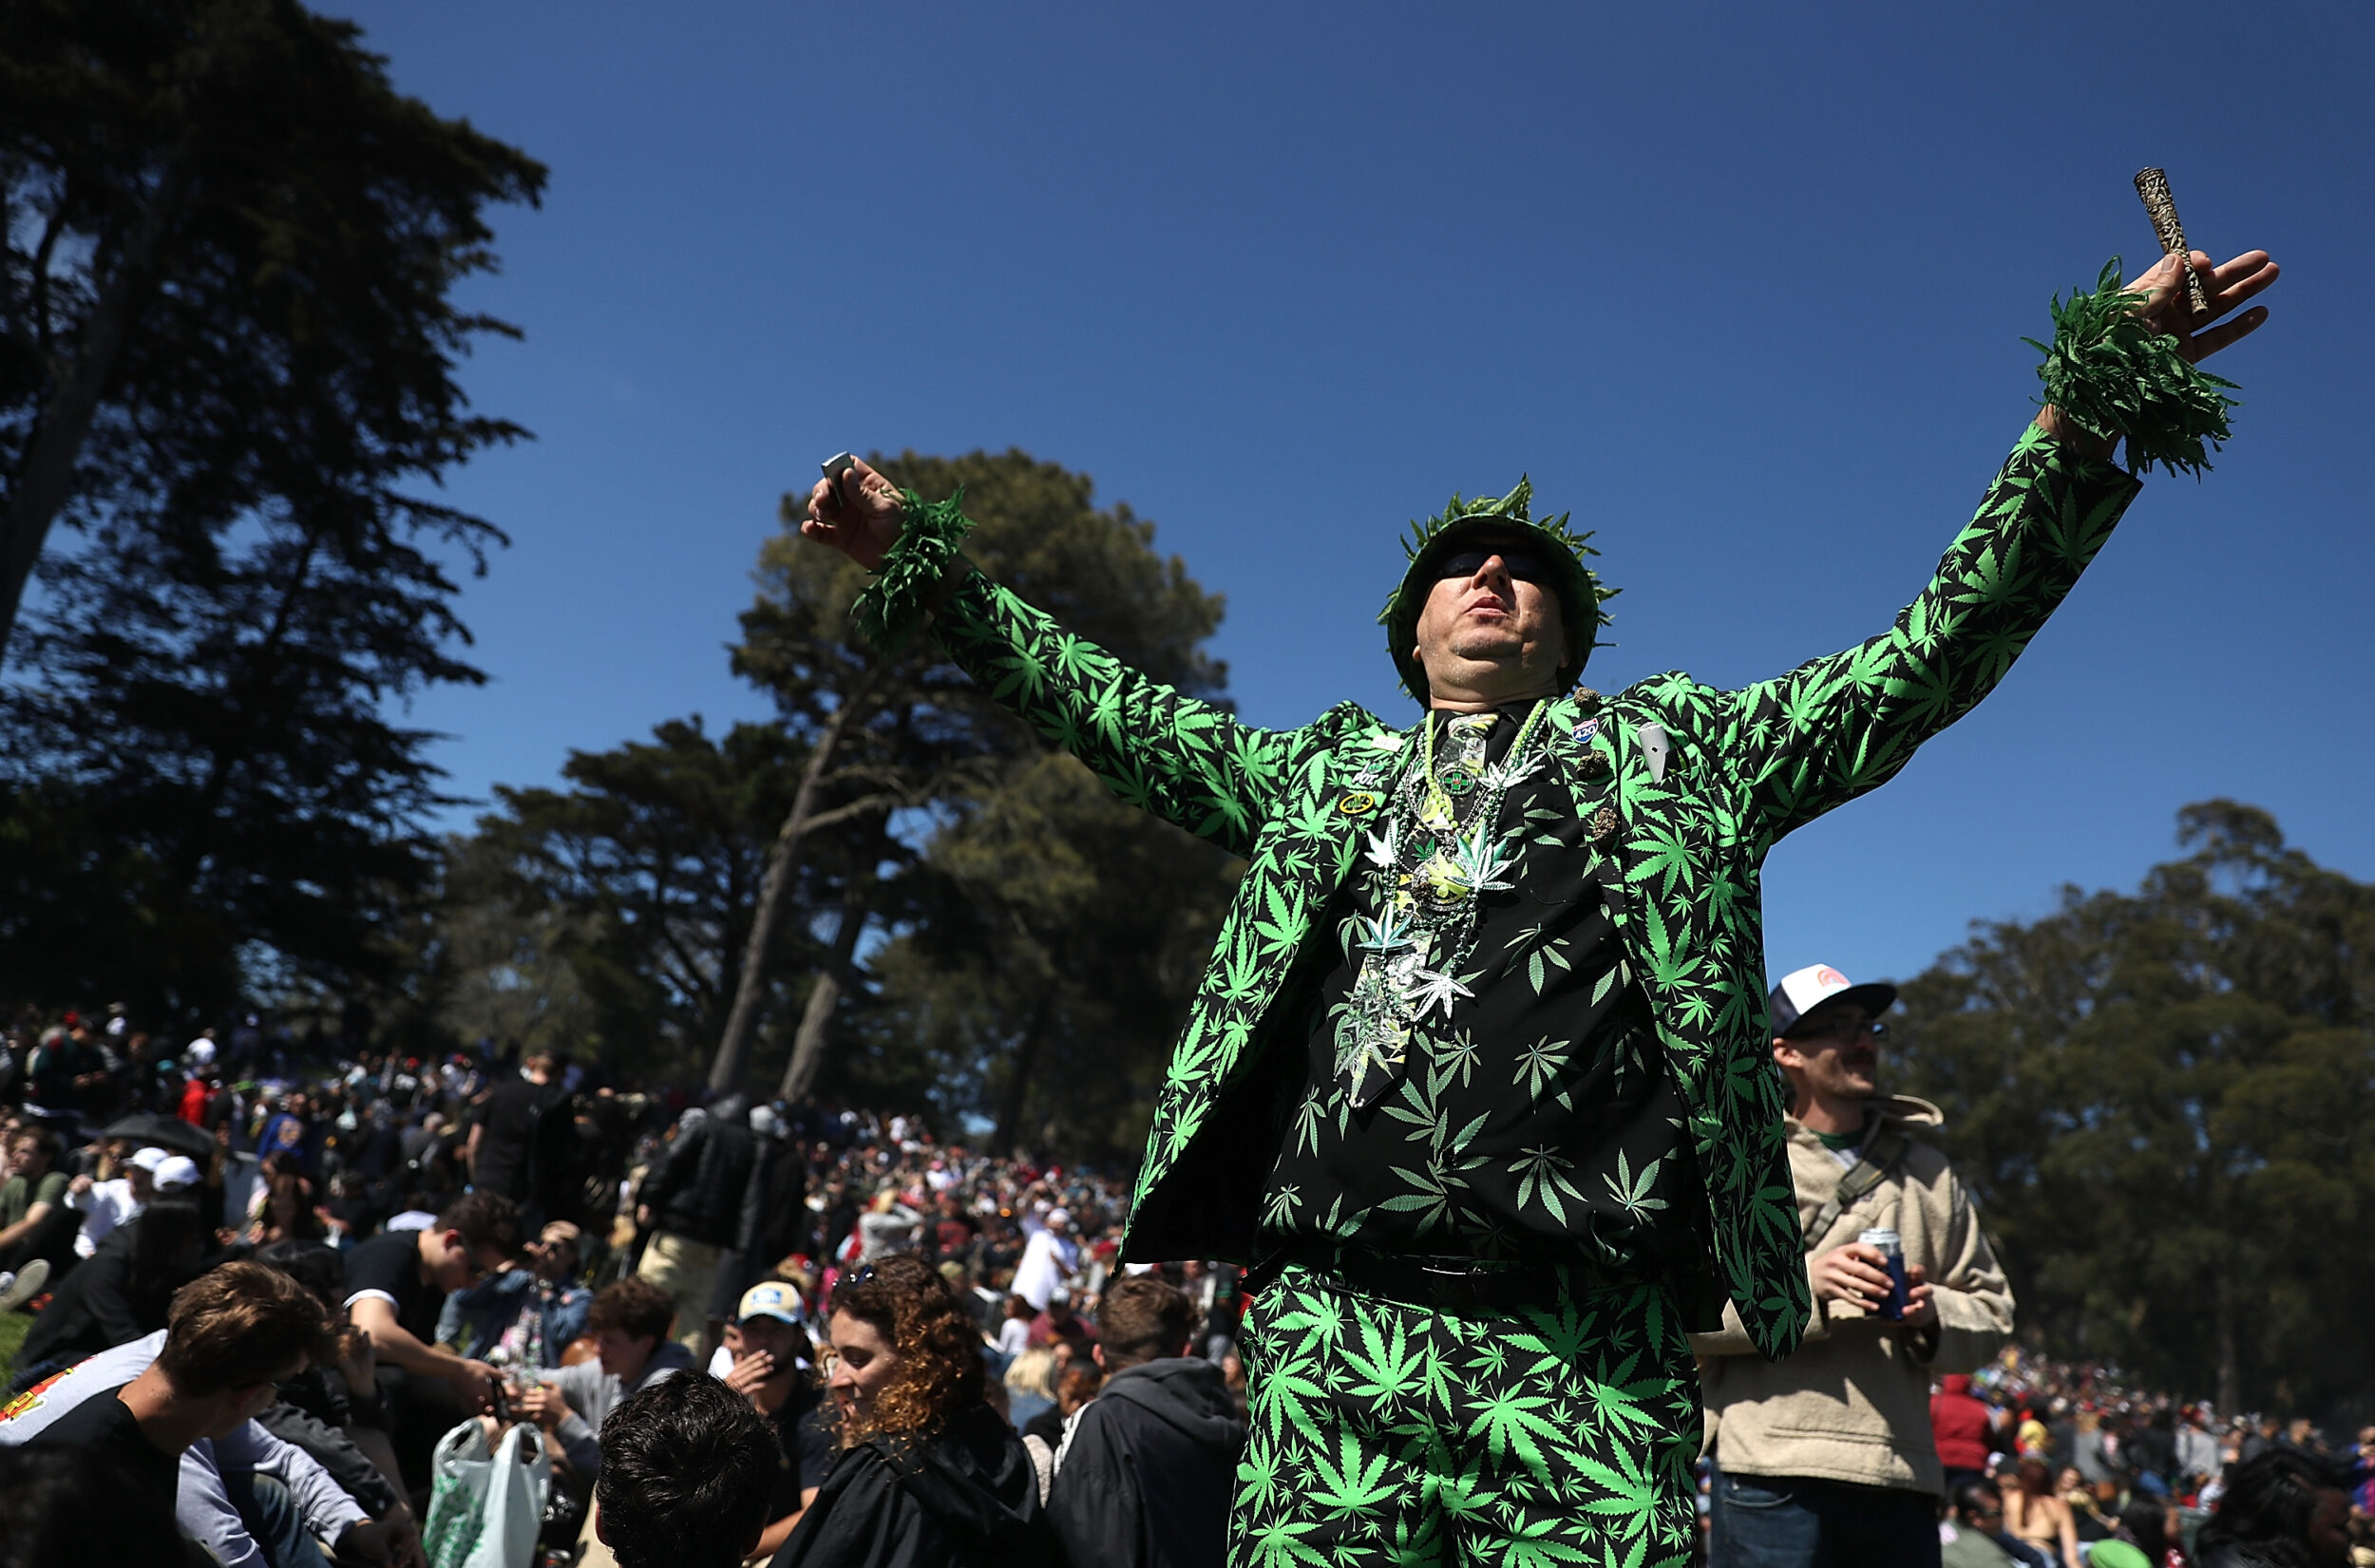 A man in a cannabis-patterned suit is standing with arms raised in a crowd under a clear sky.